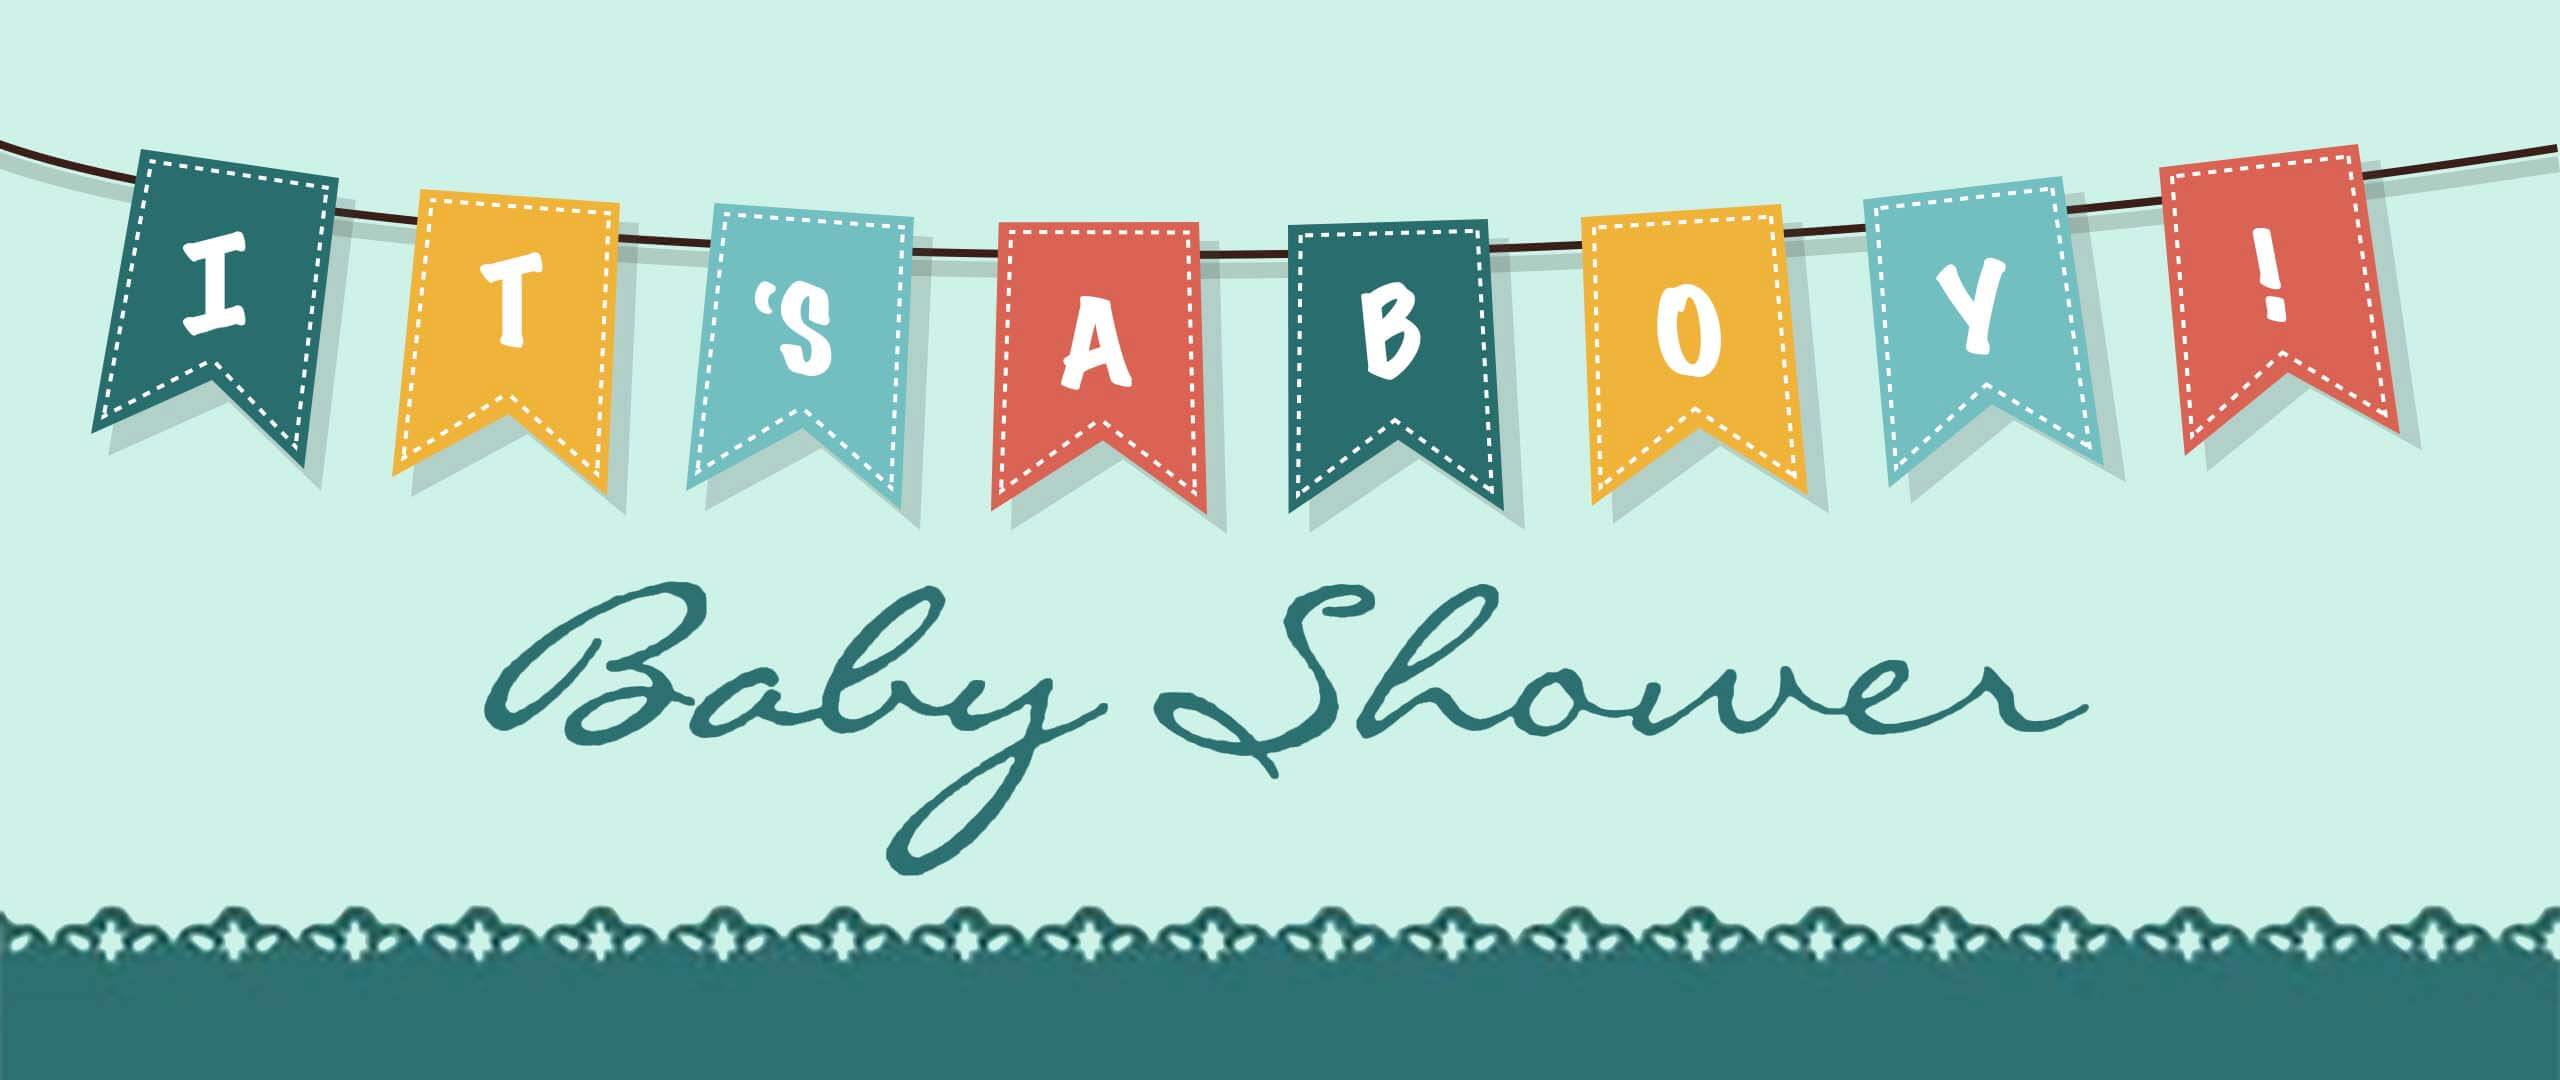 Flags Baby Shower Invite